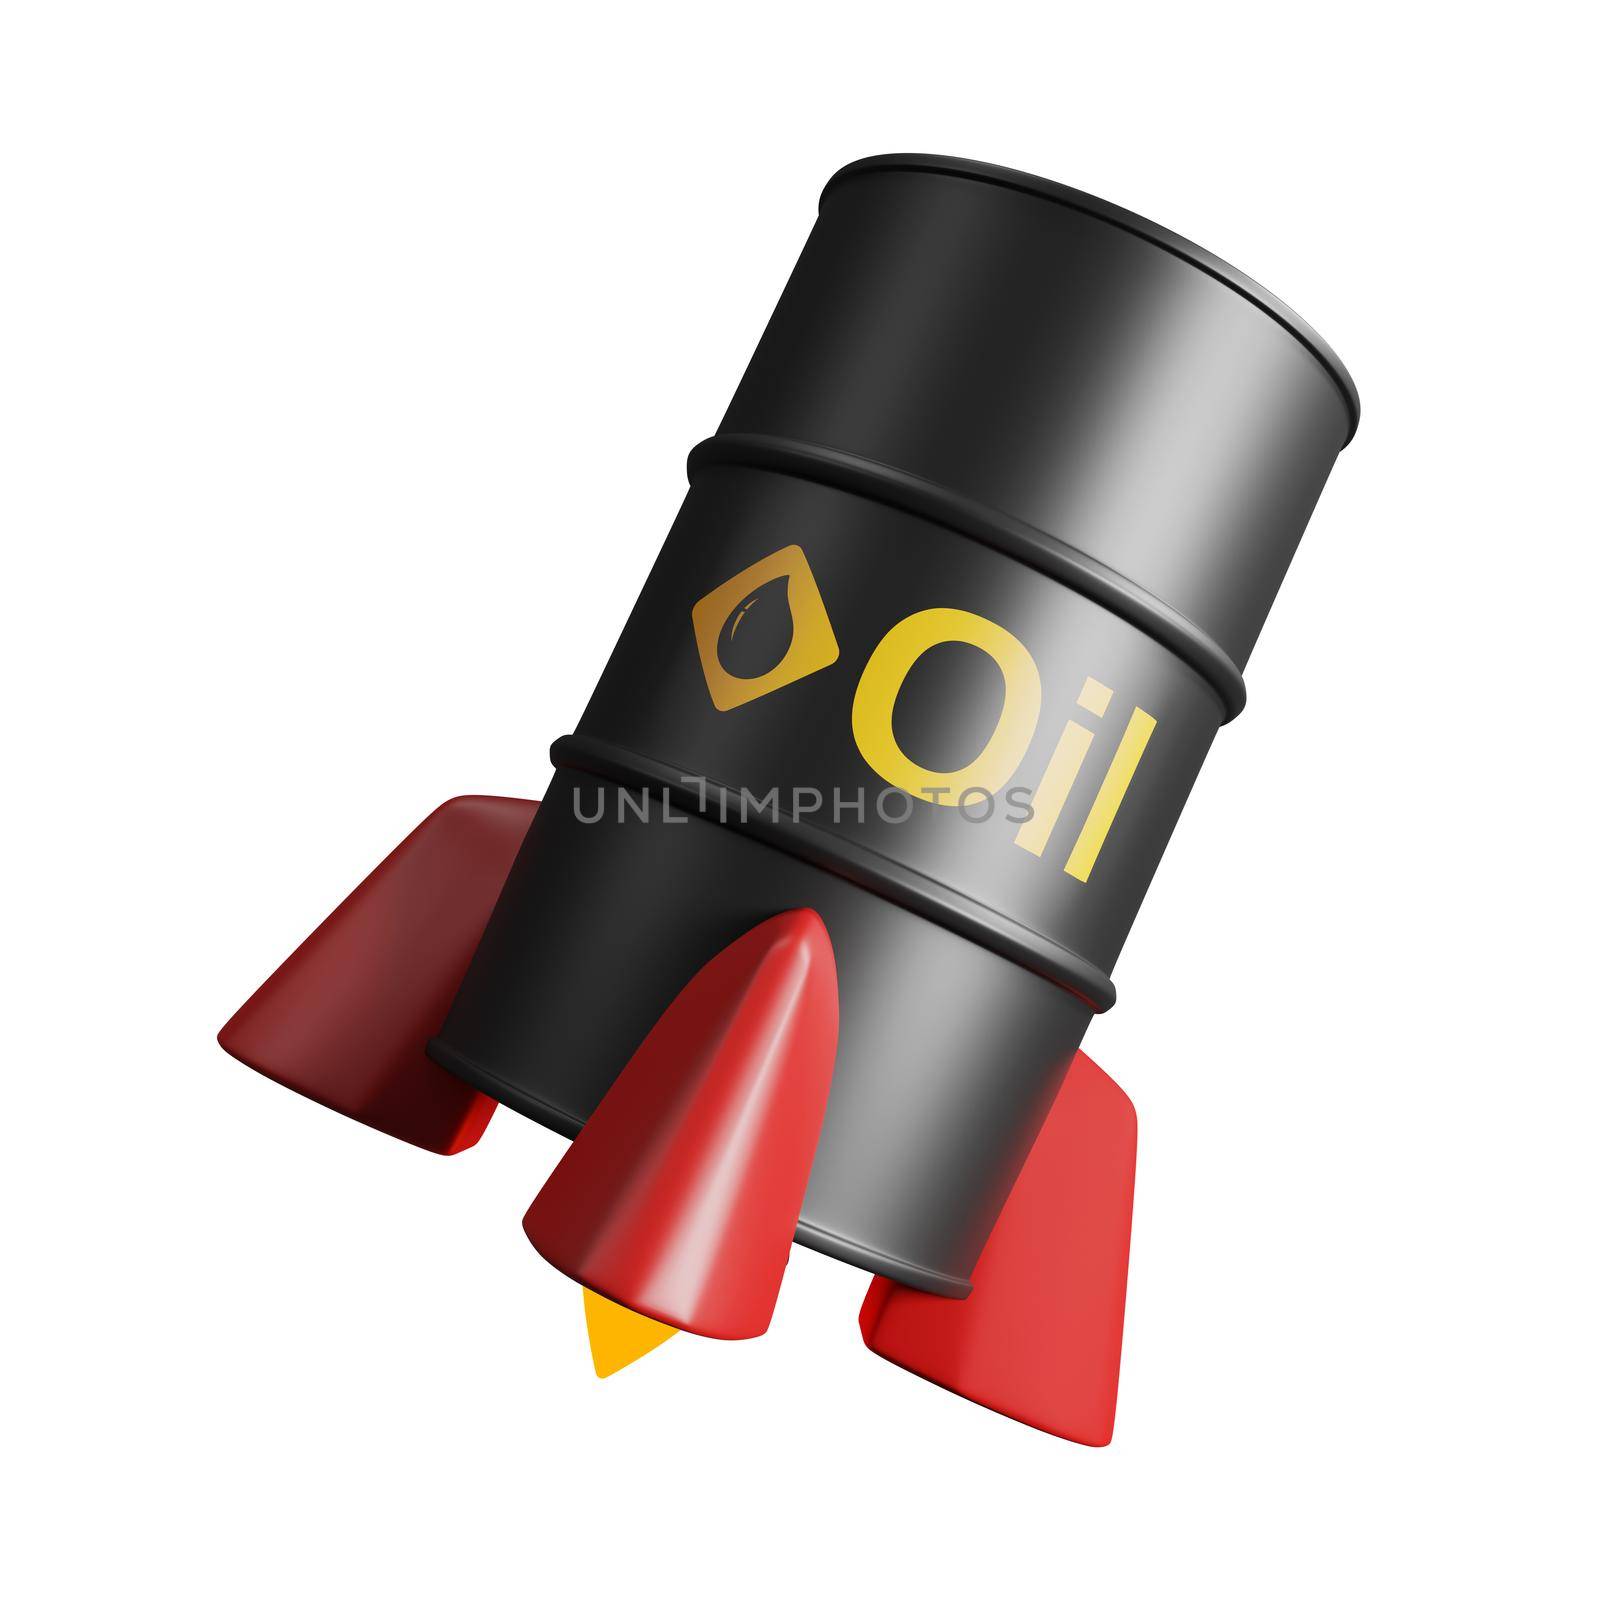 Crude oil price concept design of oil barrel rocket isolated on white background 3D render by Myimagine